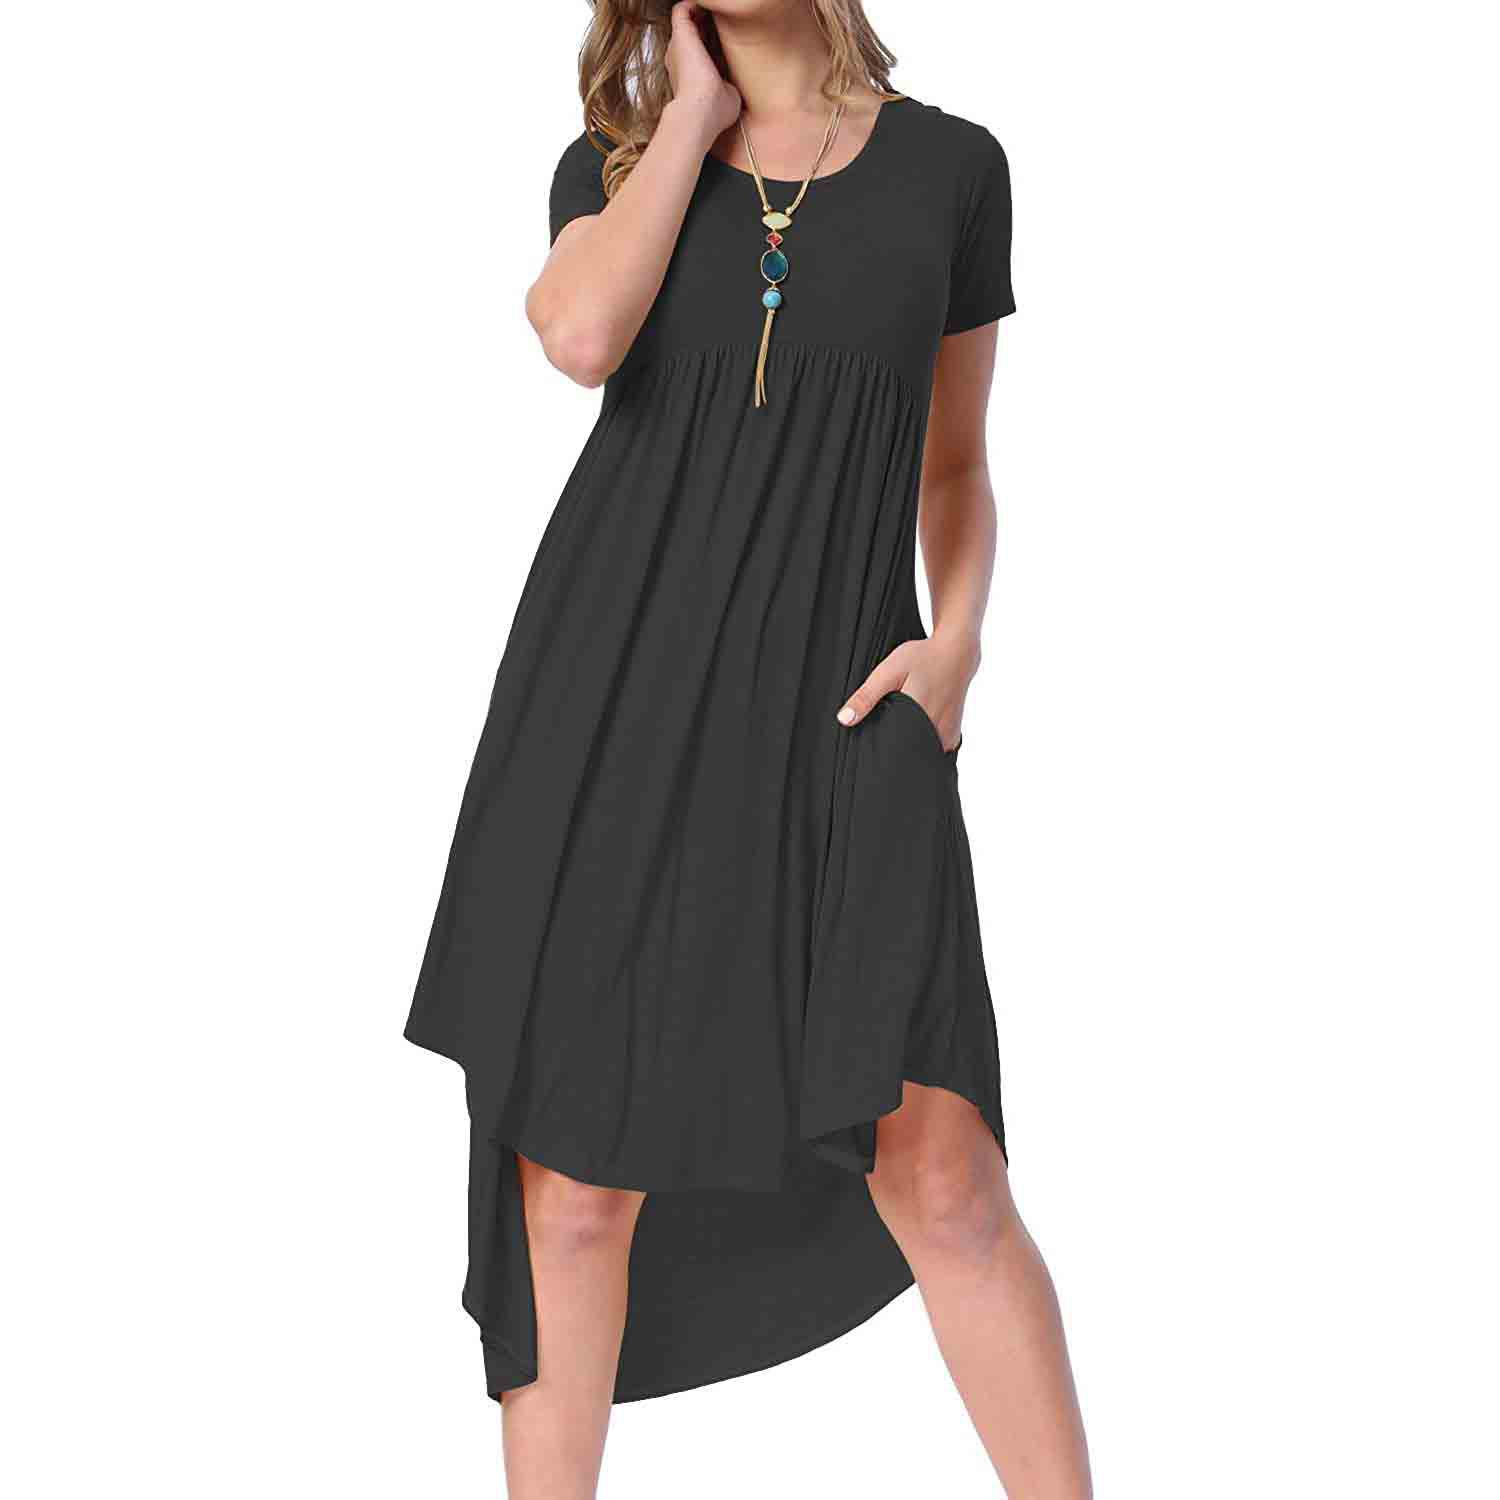 Levaca's High-Low Midi Dress with Pockets Is Just $33 on Amazon ...